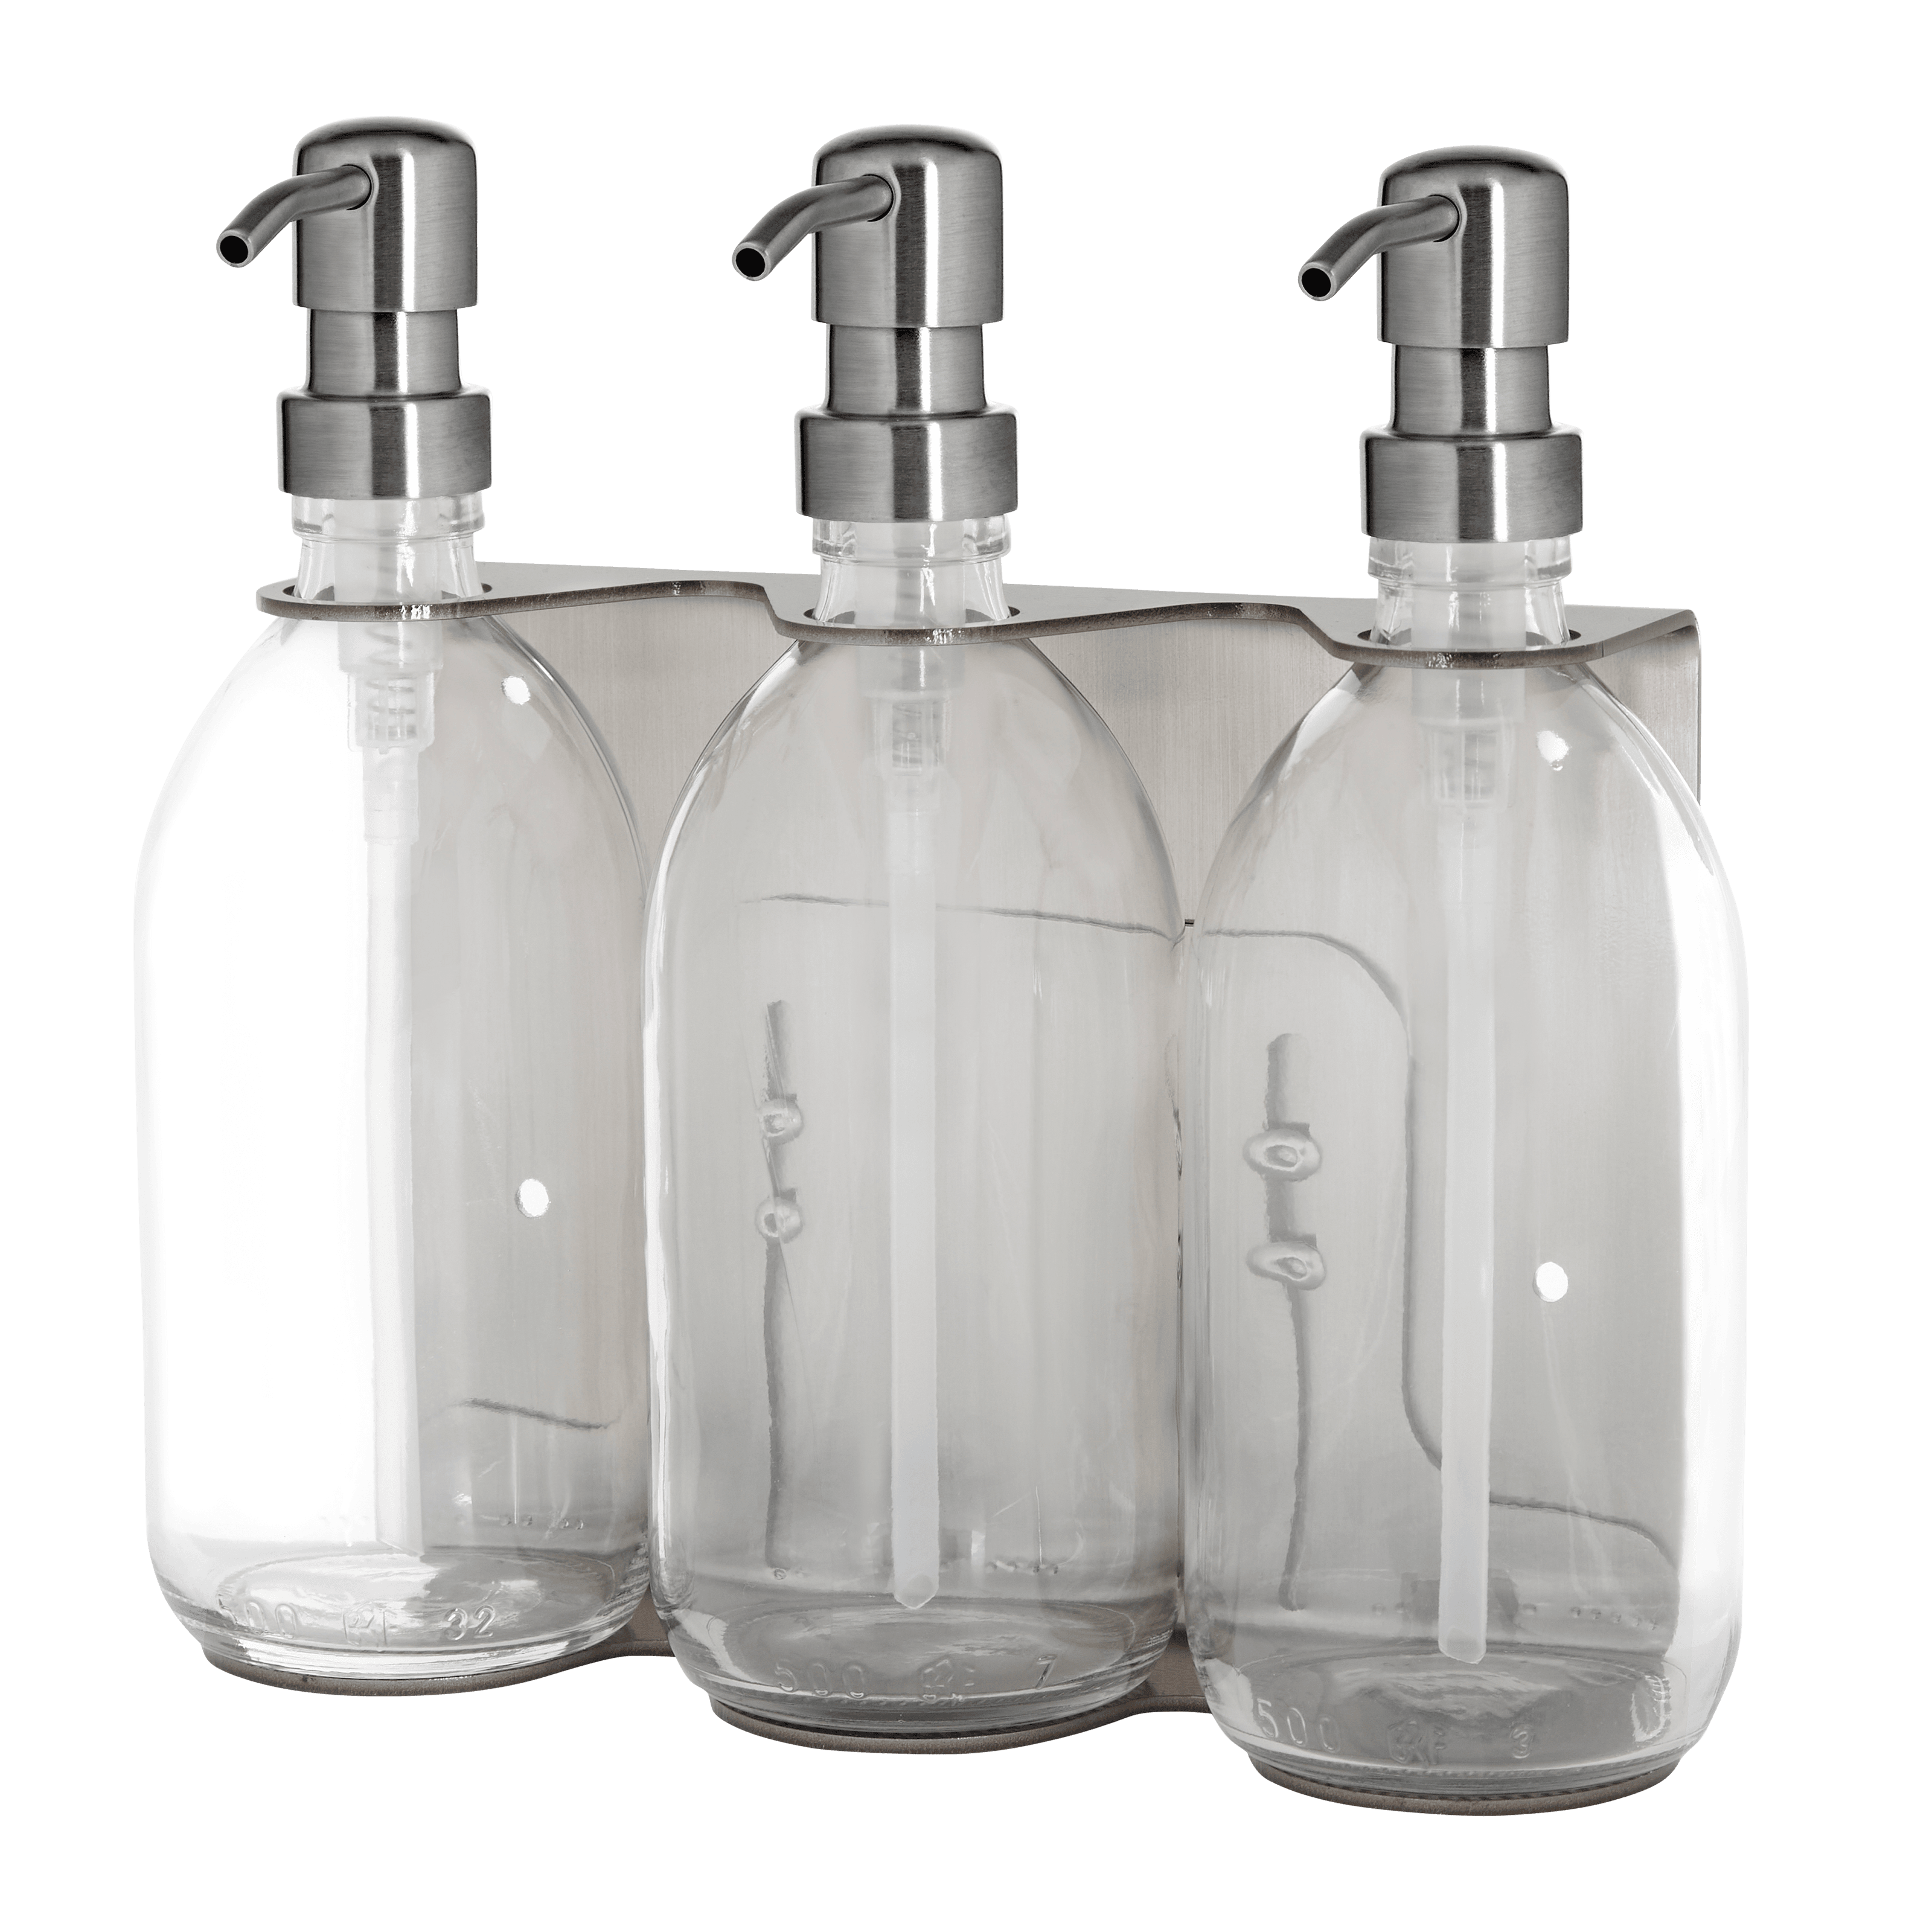 Triple Chrome Wall mounted Holder with Clear Bottles and silver metal pumps